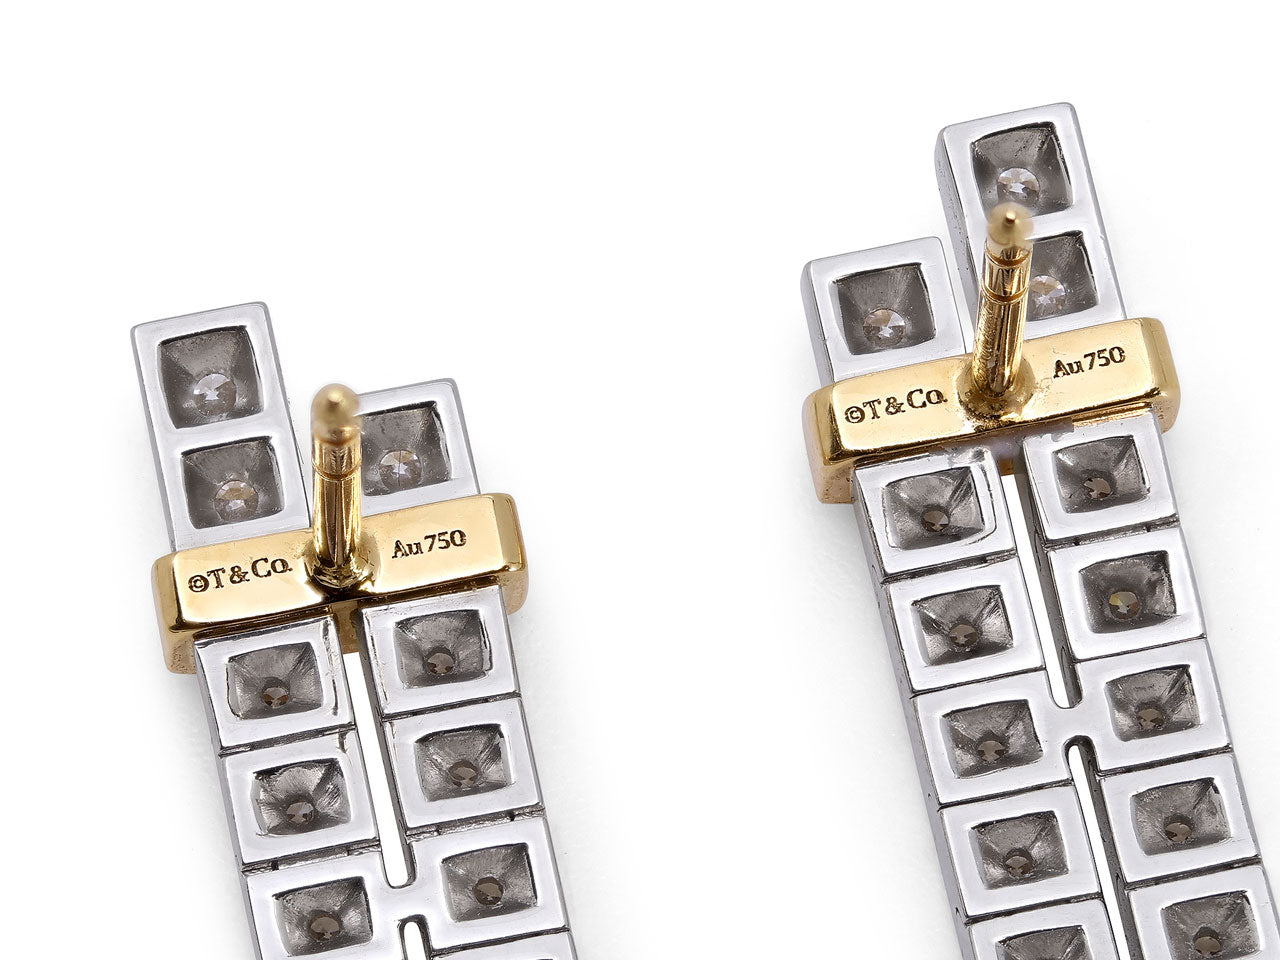 Tiffany & Co. 'Edge' Drop Earrings in Platinum and 18K Gold